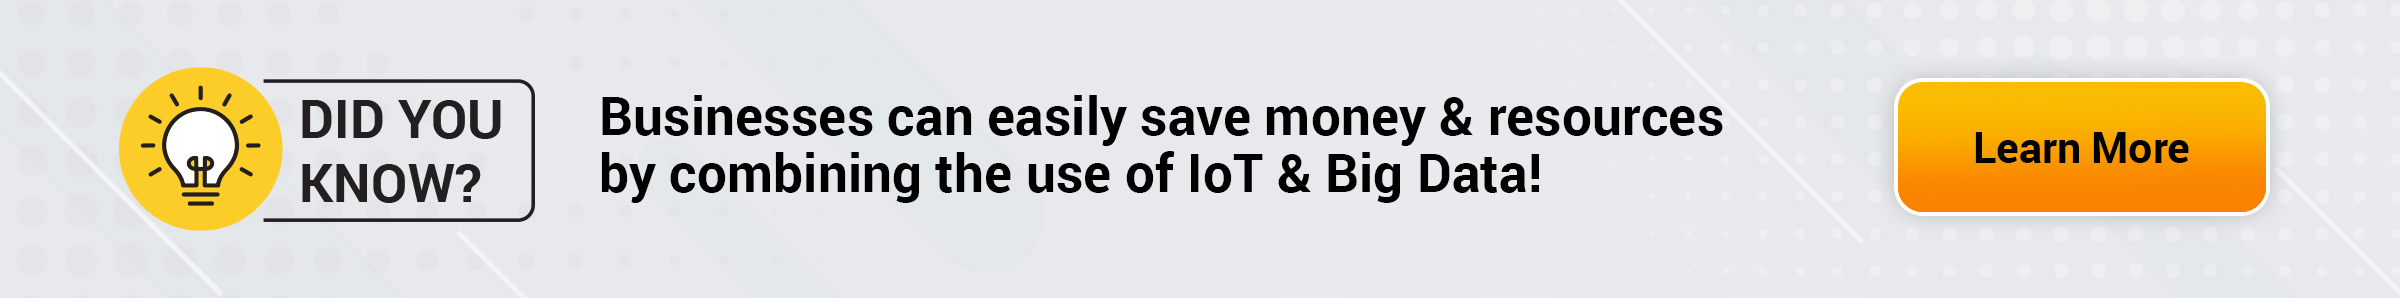 IoT & Big Data to save money and resources